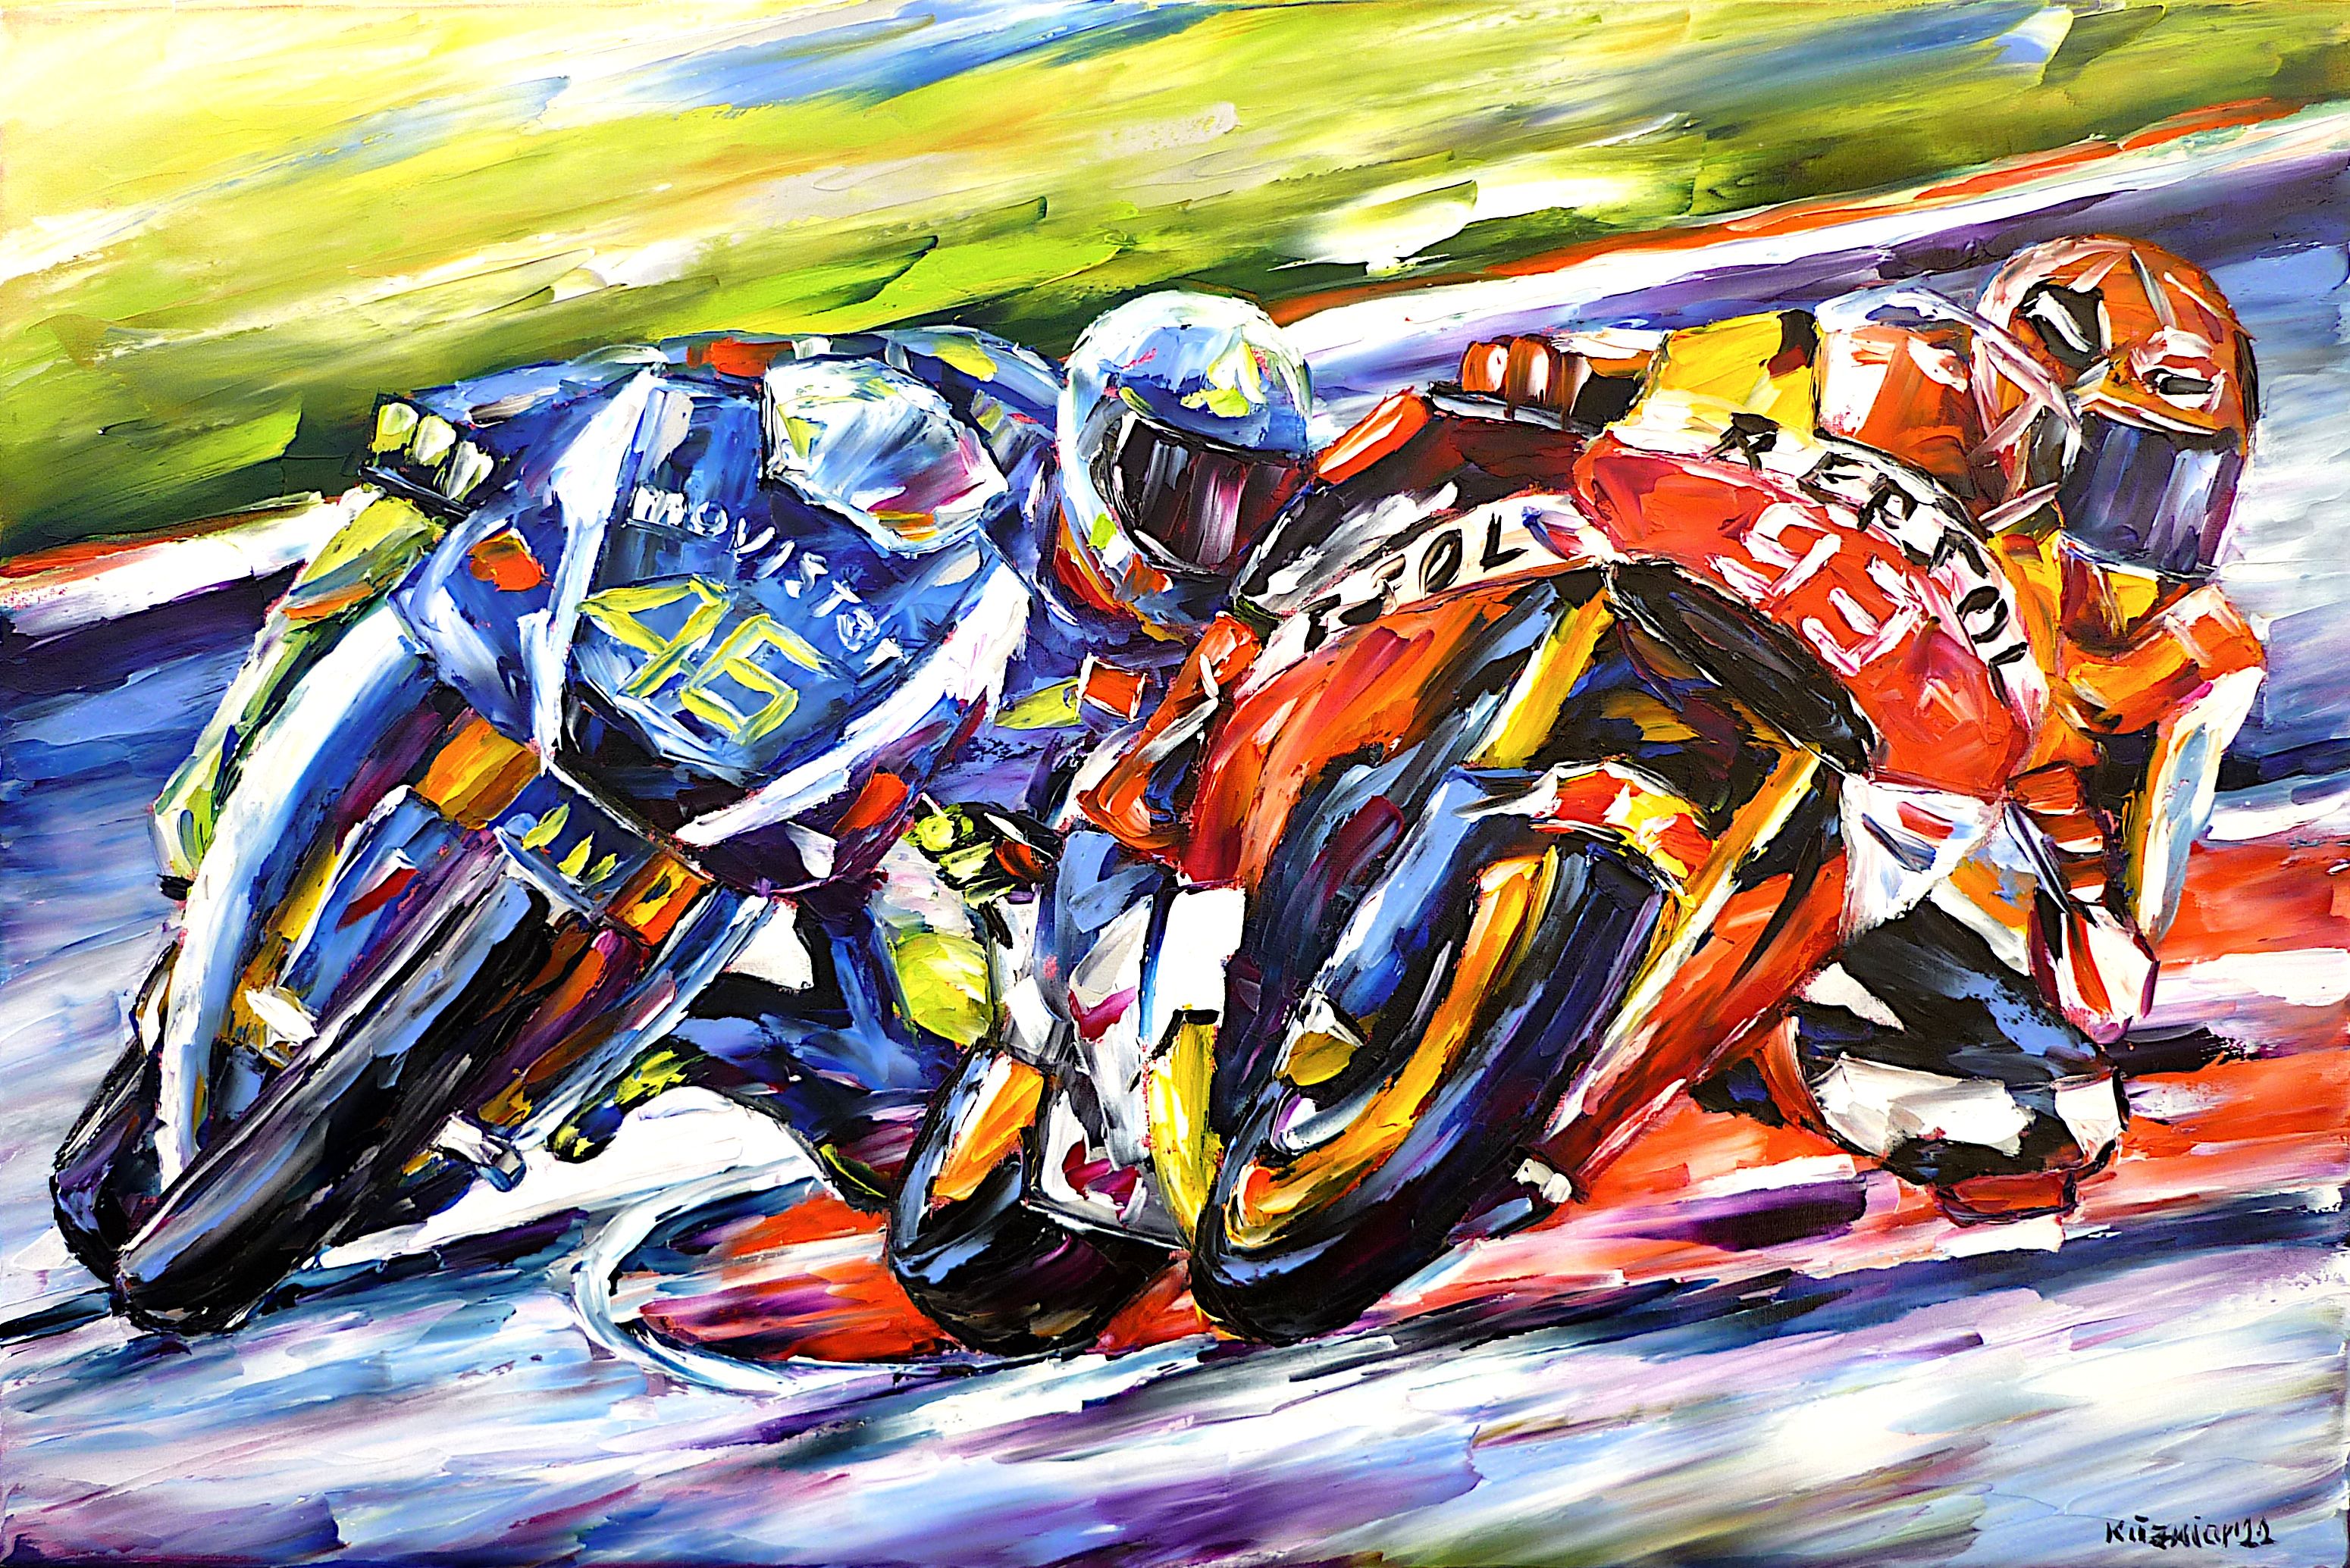 motogp,motorsport,motorcycle,motorcyclists,sports motorcycle,motorsport racing,biker,cornering,motorcycle world championship,Valentino Rossi,Marc Márquez,start number 93,start number 46,riders in the curve,sport painting,sport picture,putting into the curve,motorcycle racing,motorcycle love,motorcycling,motorcycle ride,sport lover,sport love,motorsport painting,motogp painting,motogp love,motogp lover,palette knife oil painting,modern art,impressionism,expressionism,abstract painting,lively colors,colorful painting,bright colors,light reflections,impasto painting,figurative